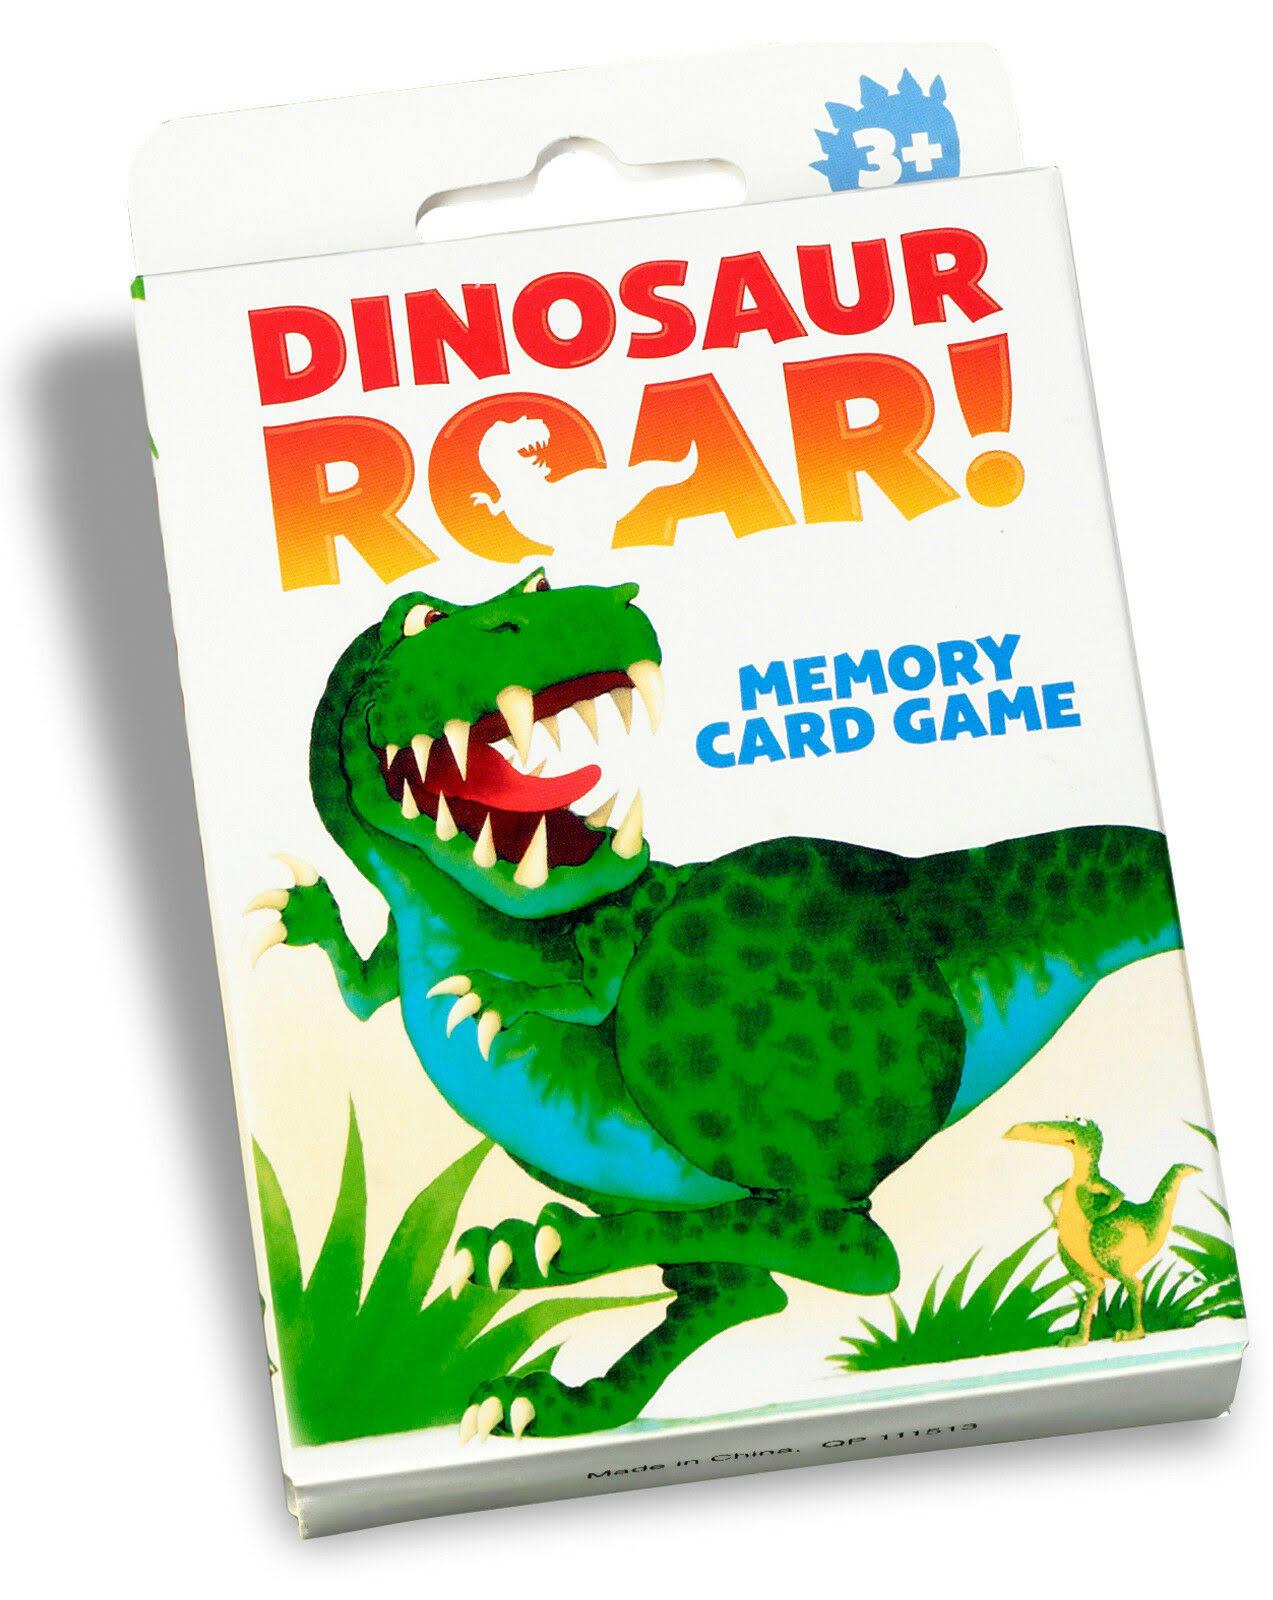 Box containing a fun card game featuring a dinosaur on the front.